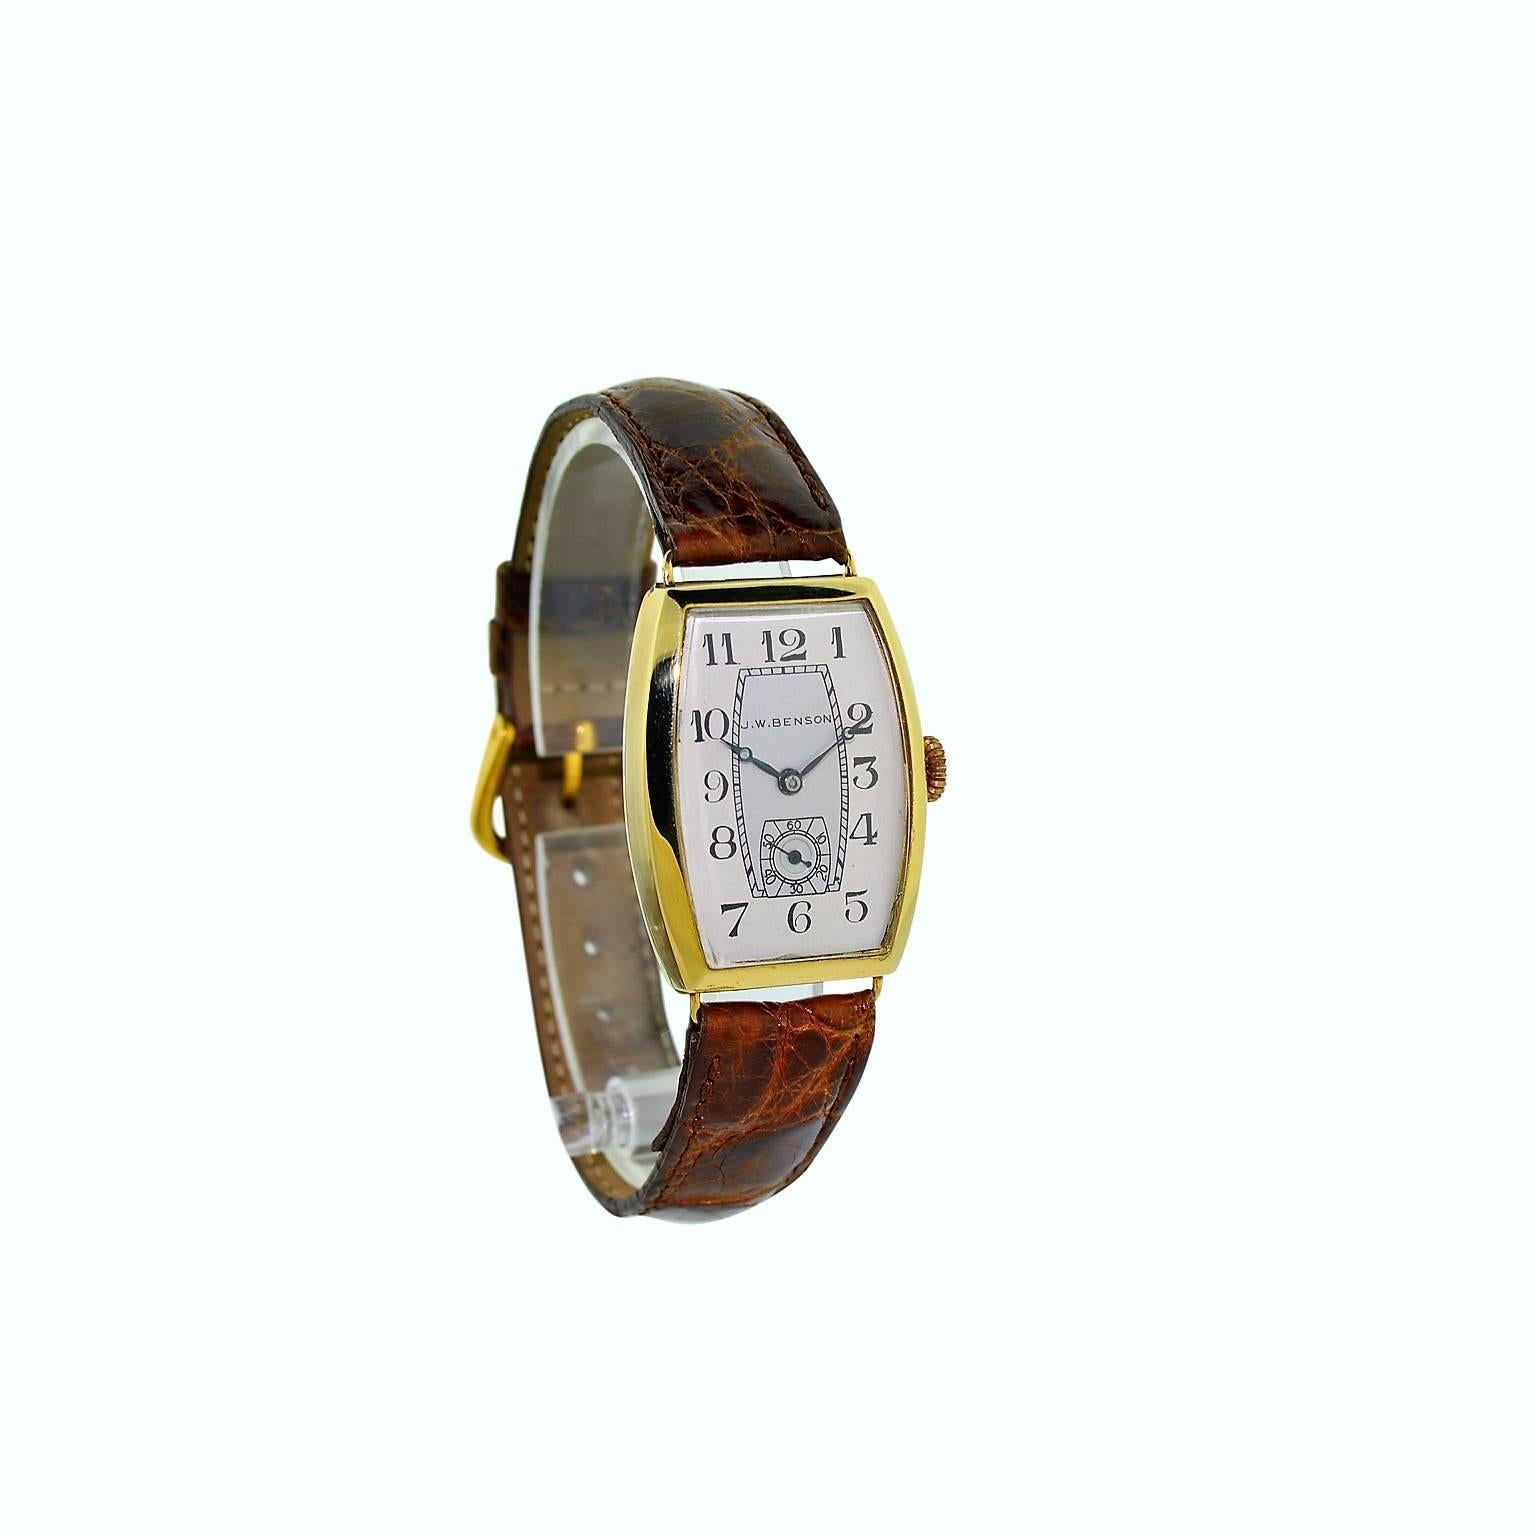 FACTORY / HOUSE:  J. W. Benson London
STYLE / REFERENCE: Art Deco 
METAL / MATERIAL: 14 Kt. Yellow Gold
DIMENSIONS: 39mm X 25mm
CIRCA: 1930's
MOVEMENT / CALIBER: Manual Winding / 15 Jewels 
DIAL / HANDS: Two Silvered with Breguet Style Numerals /